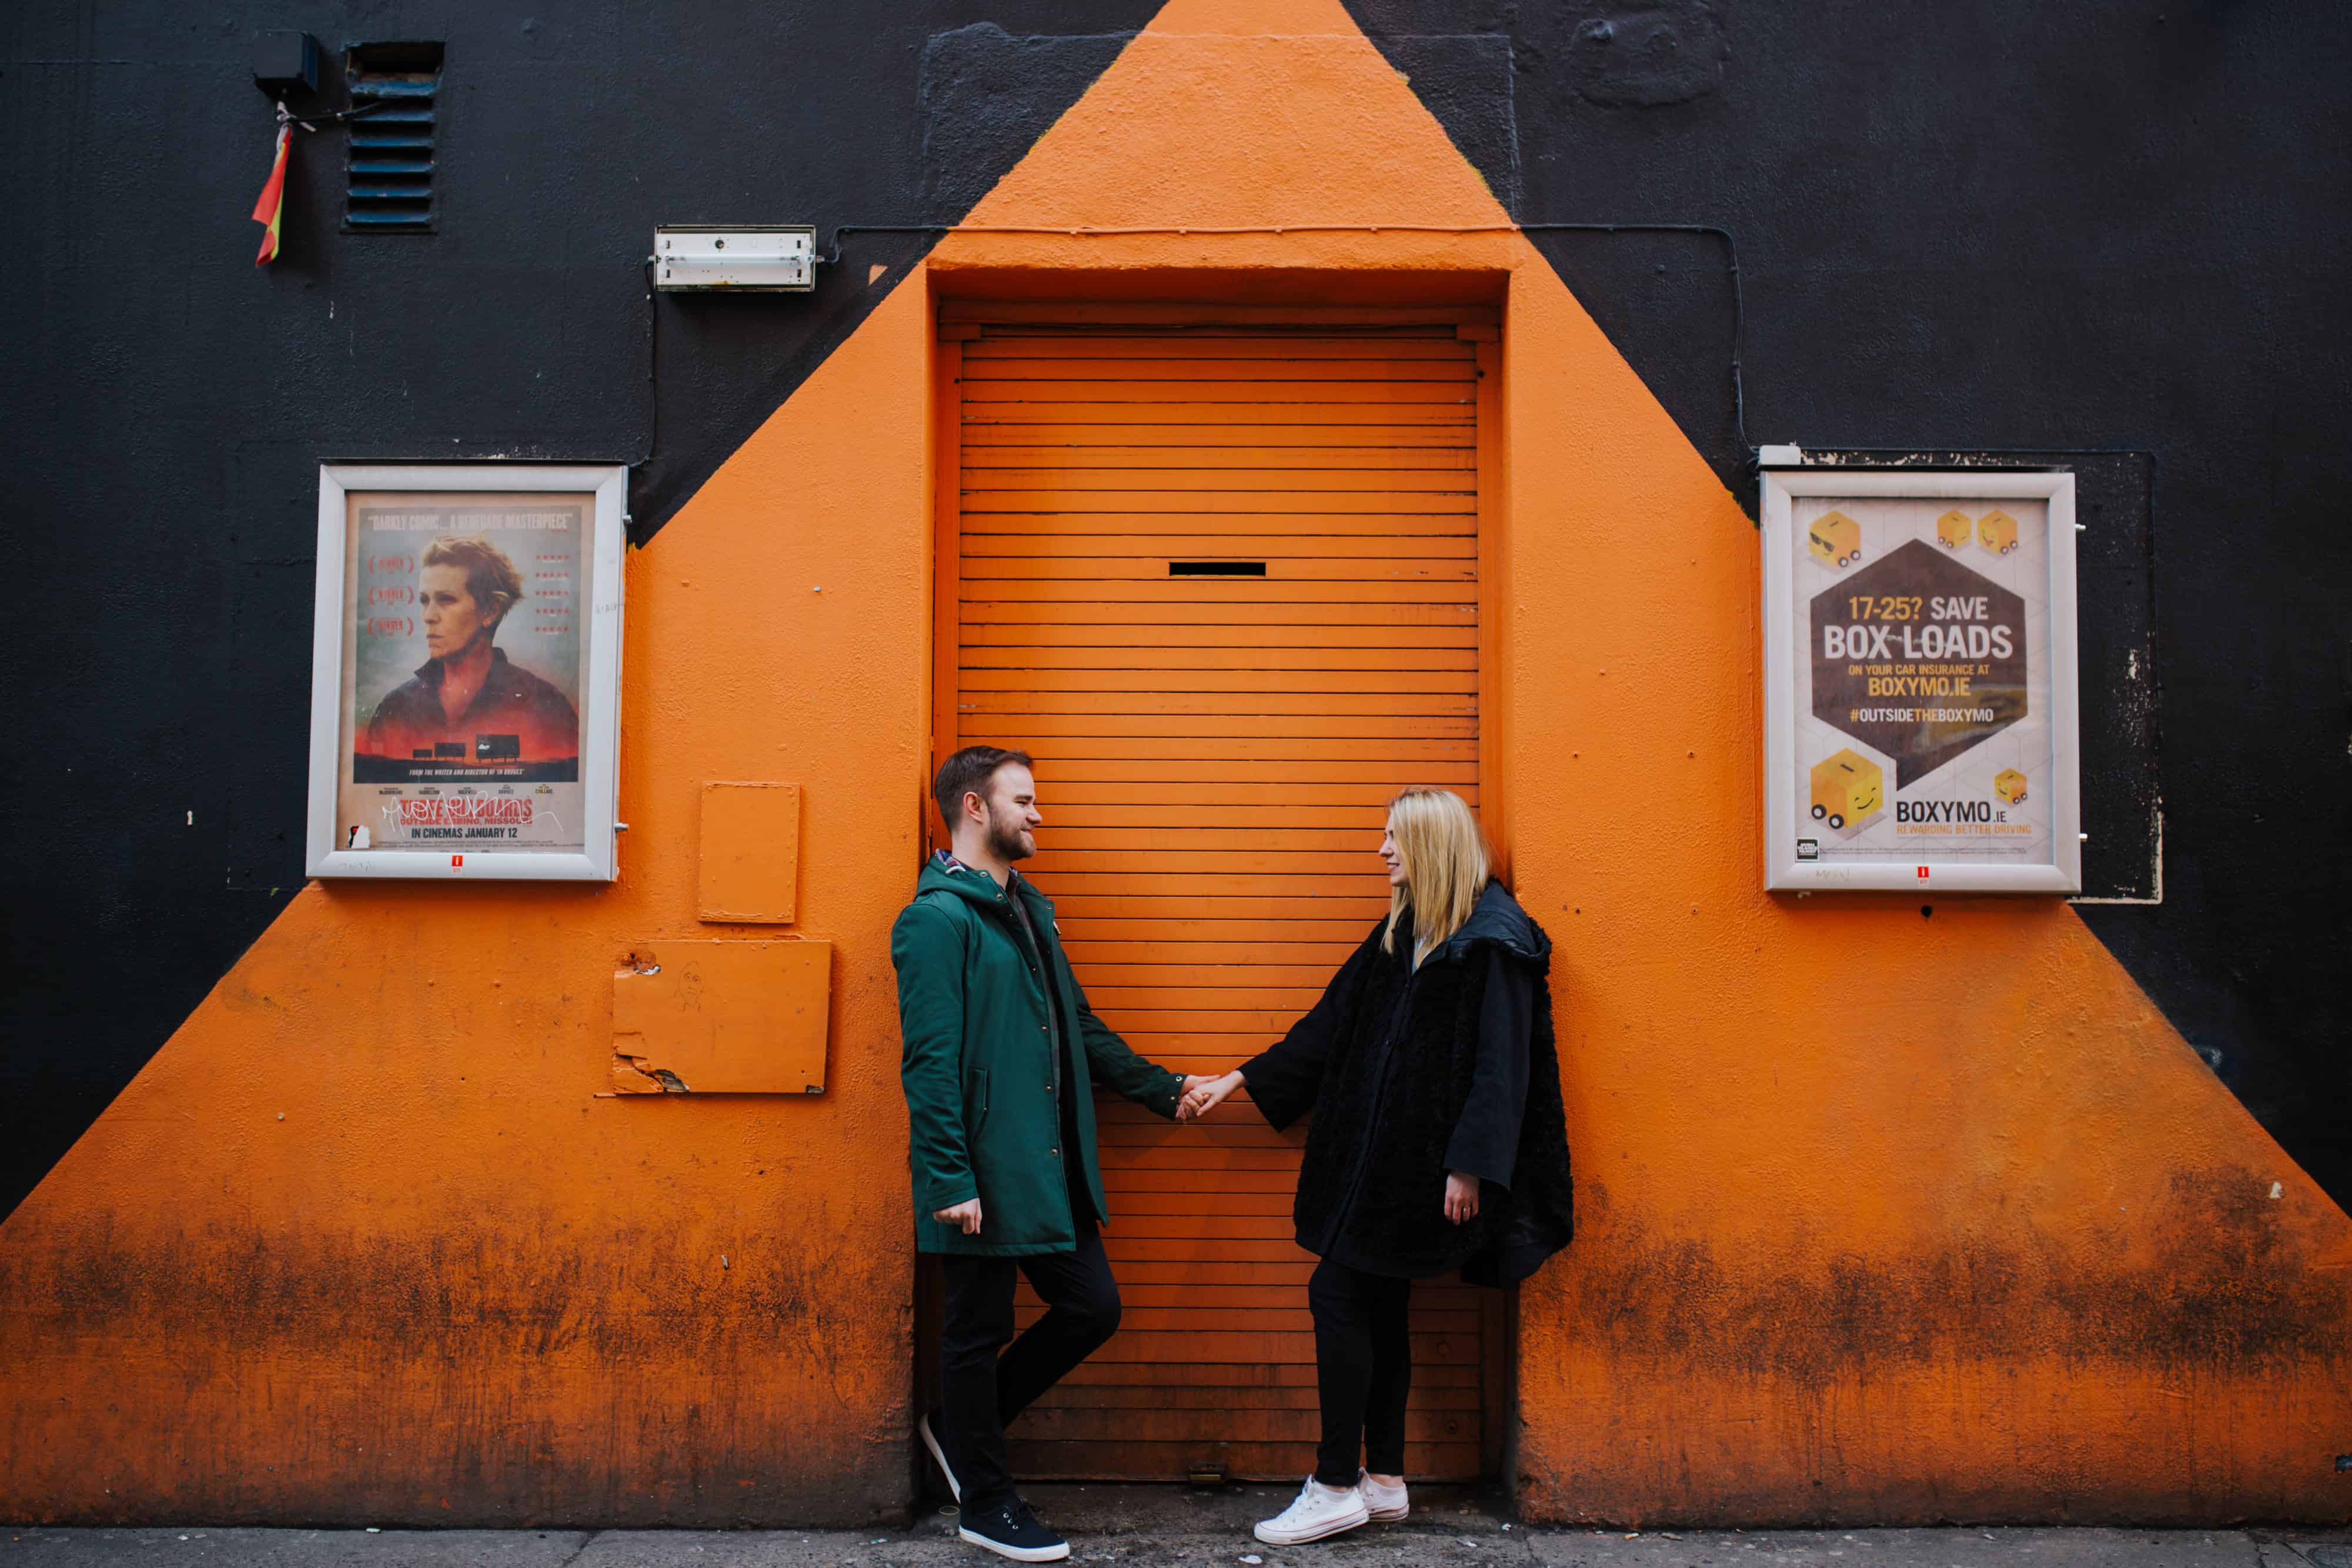 Colorful engagement shoot in Dublin centre